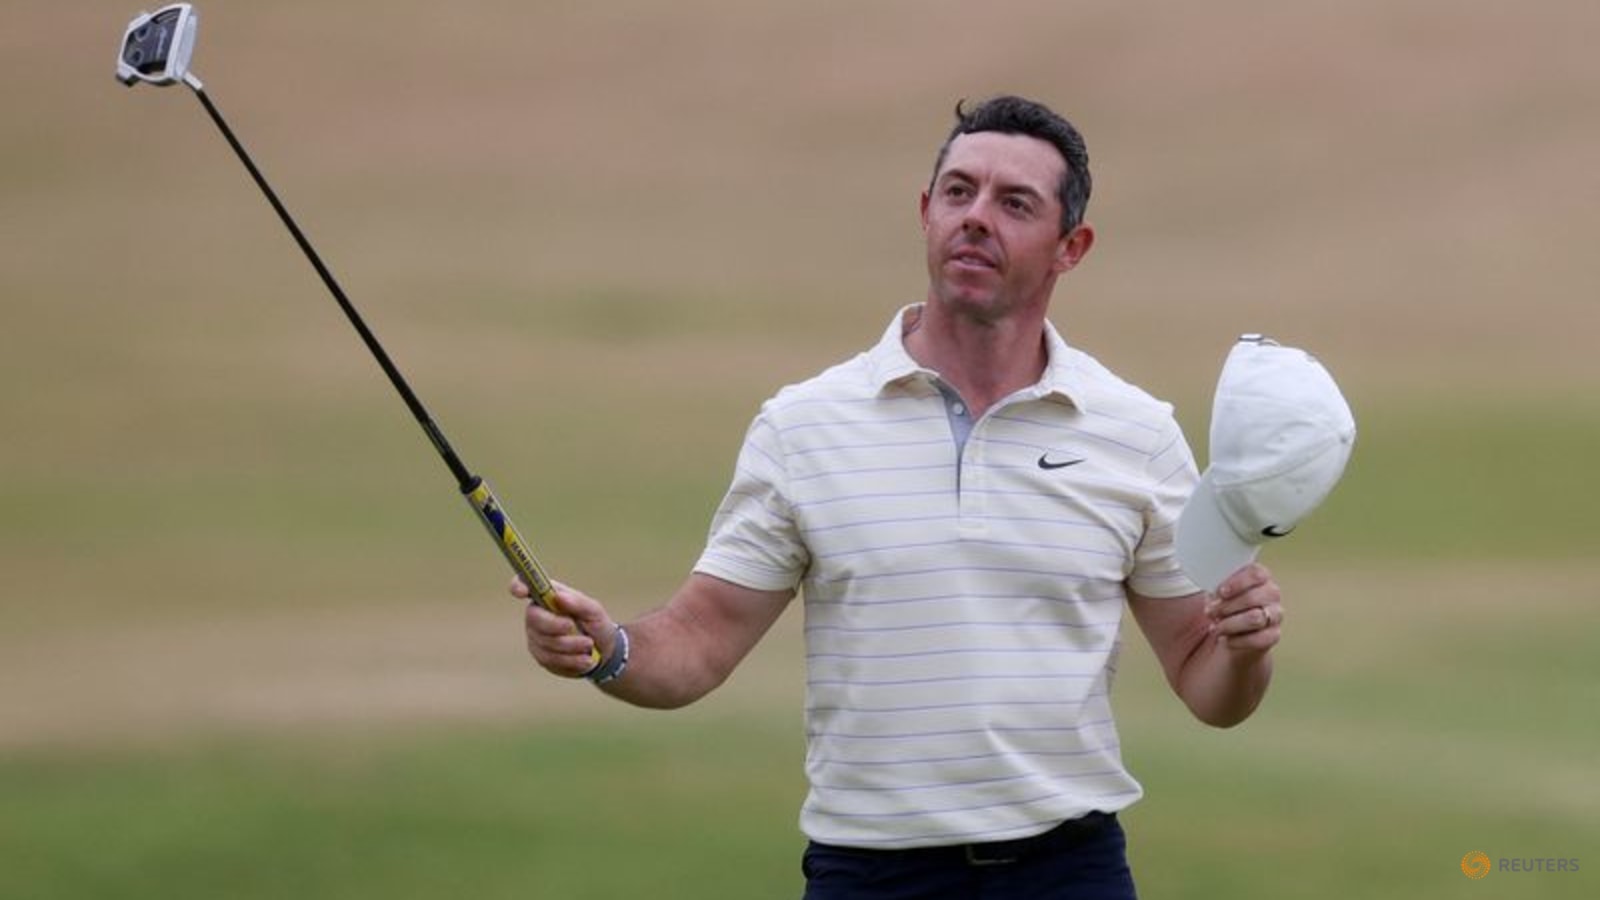 McIlroy hails influence of 'hero' Woods after PGA Tour players meeting